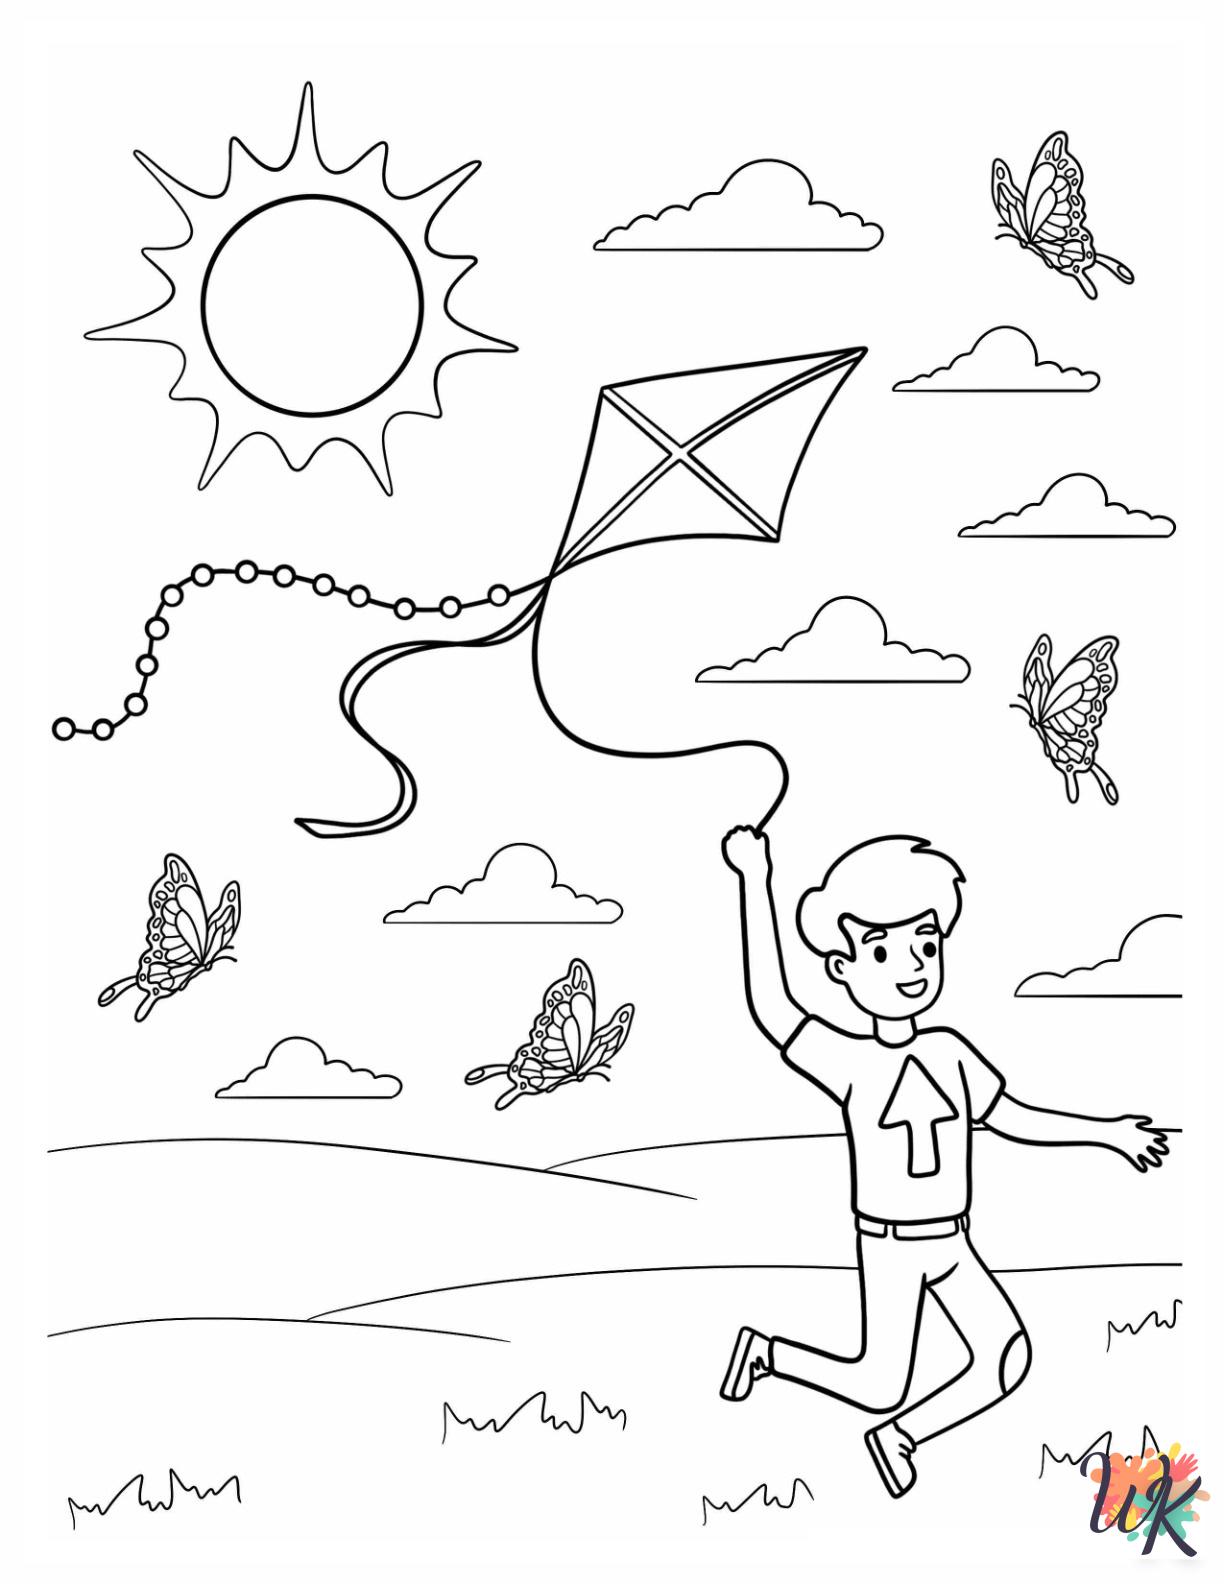 Kite Coloring Pages 2